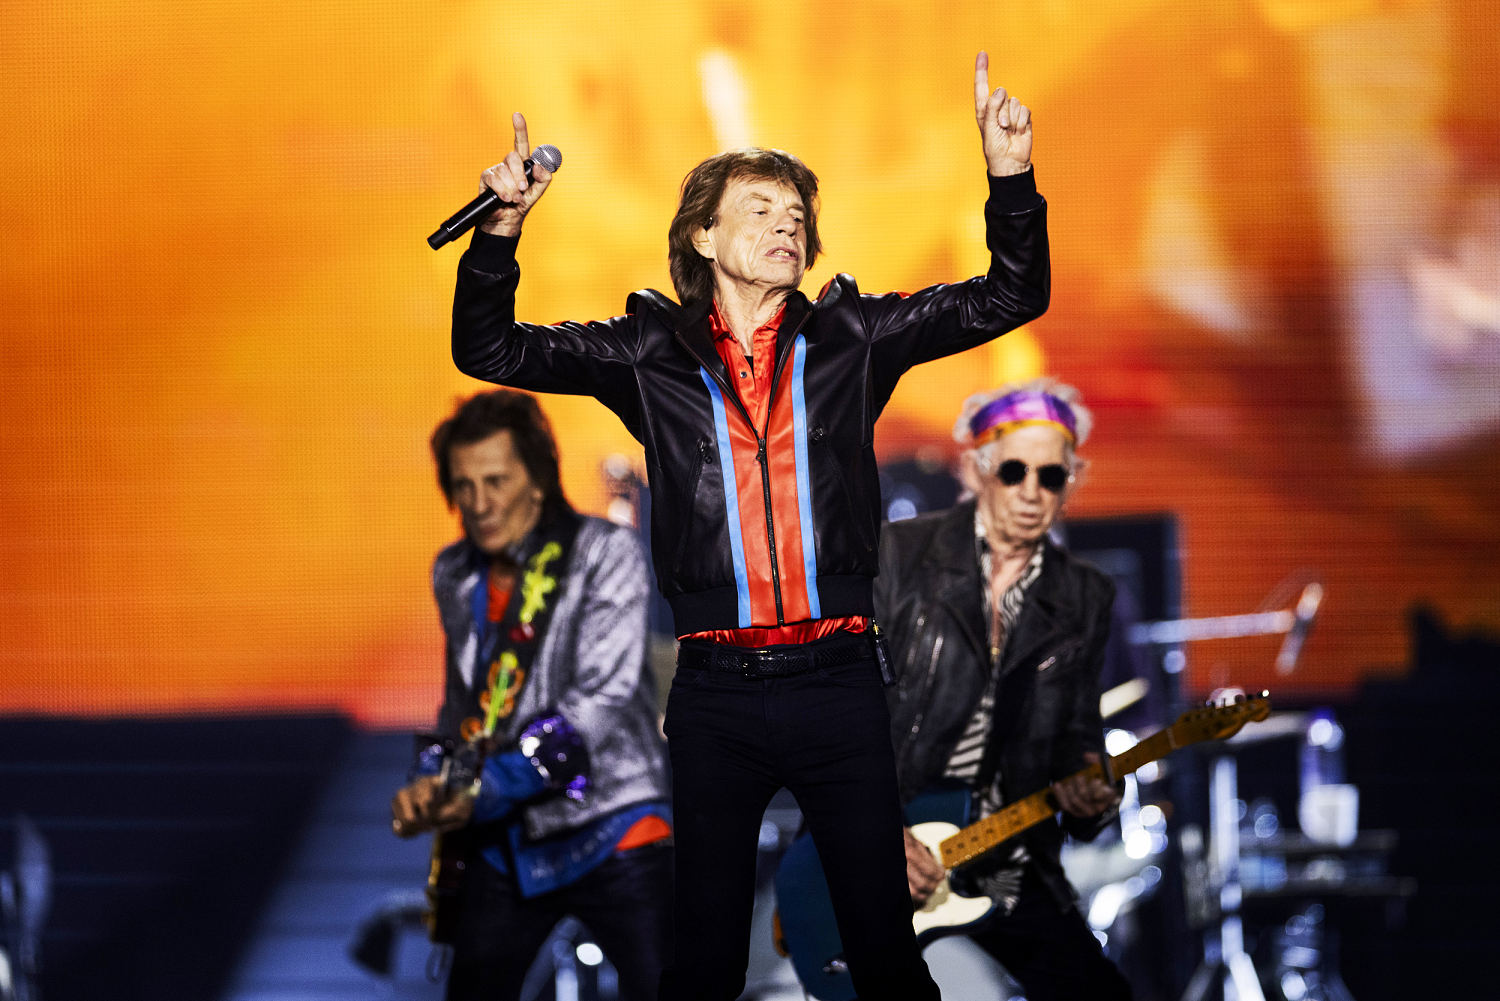 The Rolling Stones announce tour dates for 2024 across North America